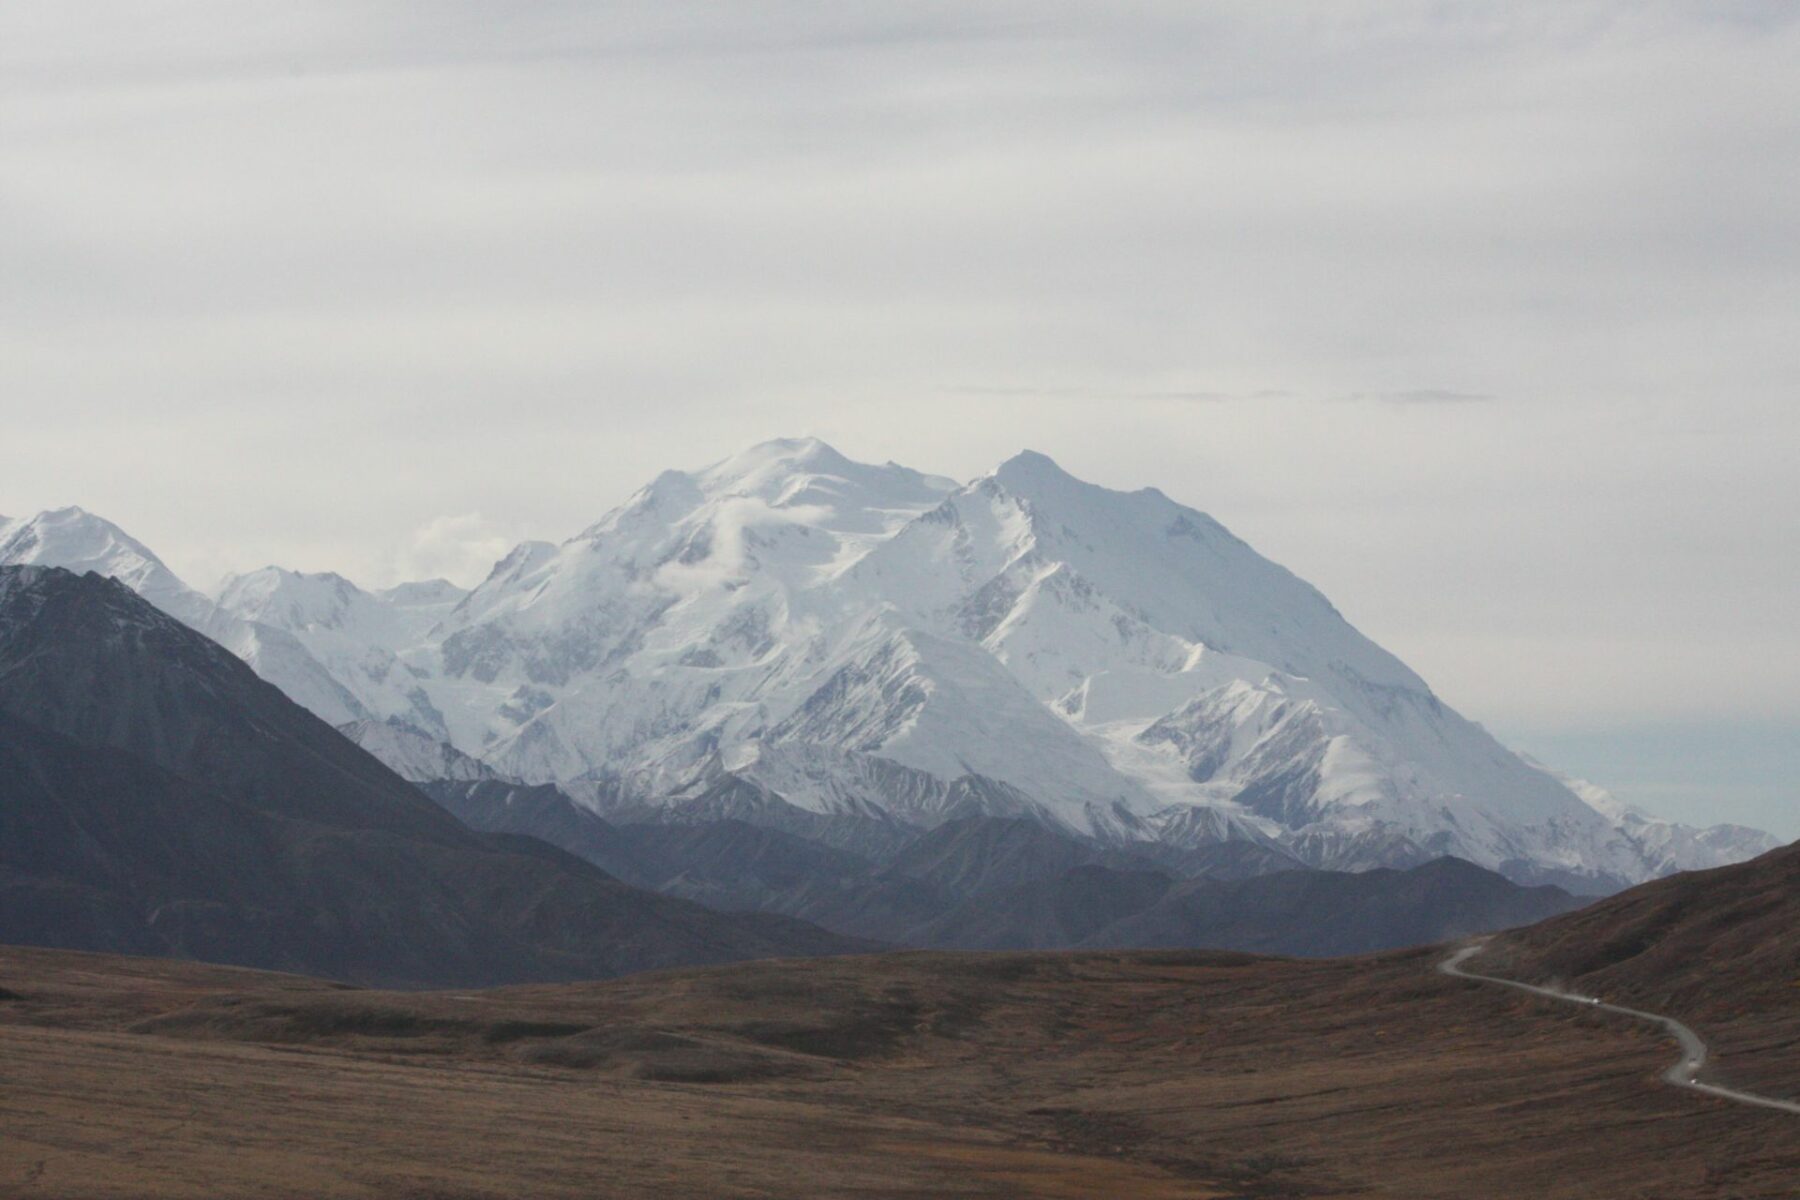 Denali, the High One, is seen across a valley in Denali National Park, a popular Alaska National park. There is a road following the valley.